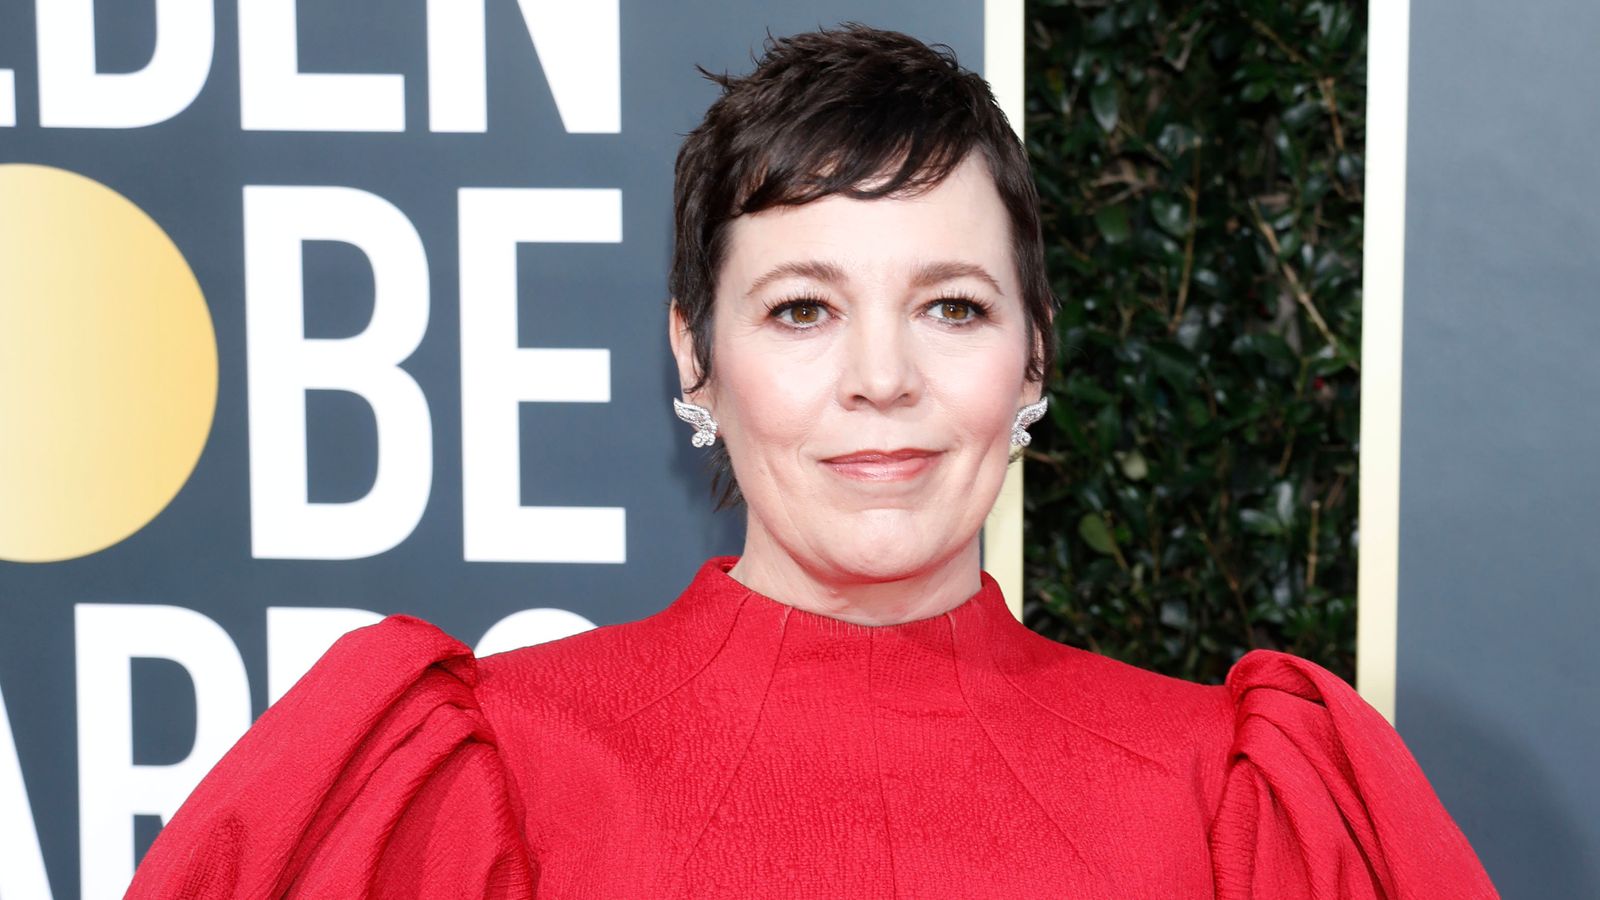 COVID-19: Stars including Olivia Colman call for 'gadget tax' to fund the arts - Sky News